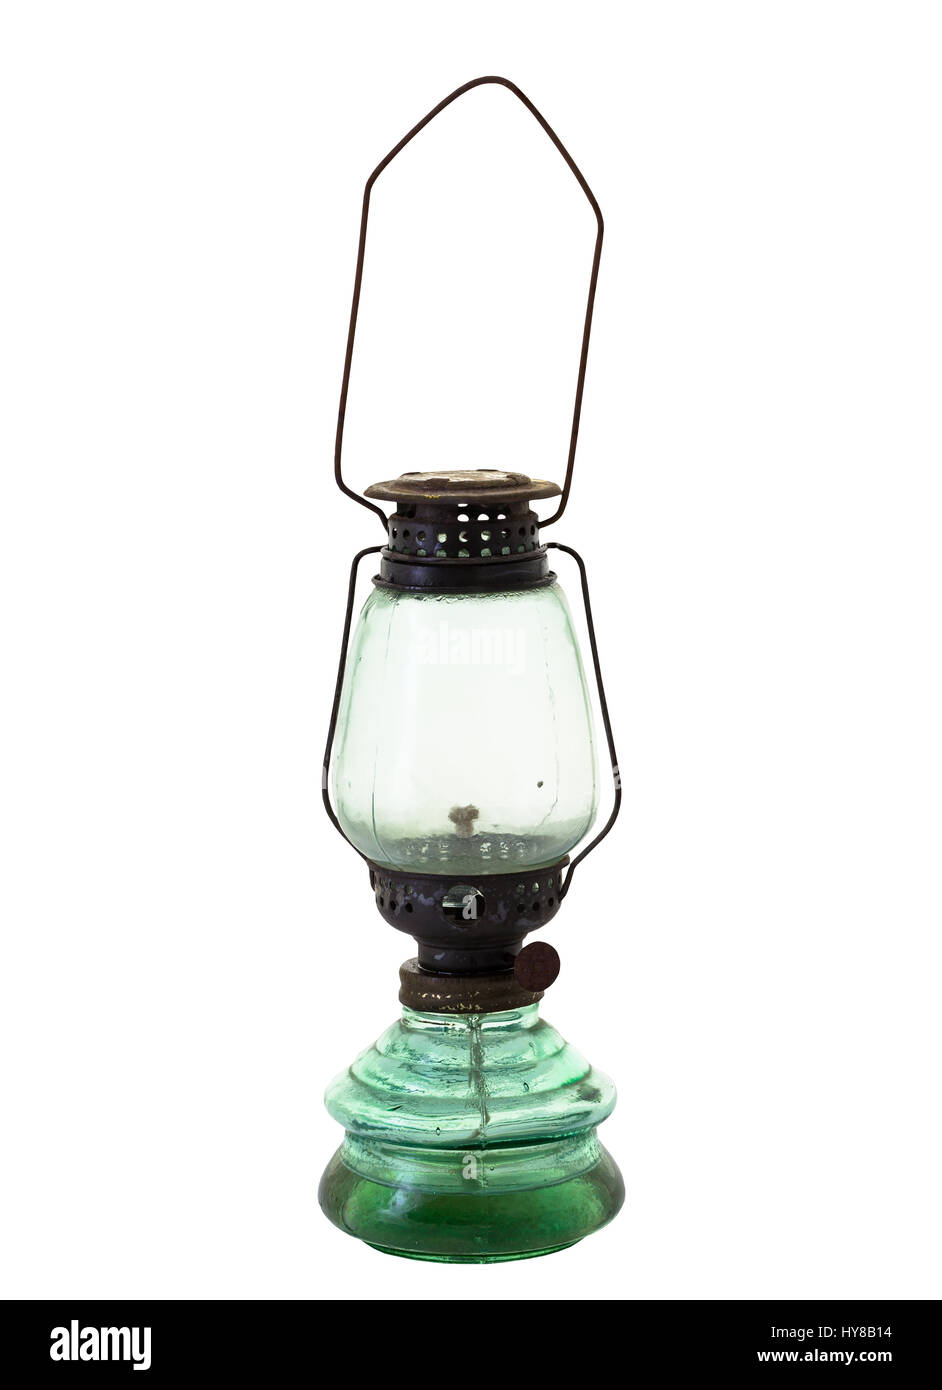 Oil lamp wick lantern made of glass and metal isolated on white